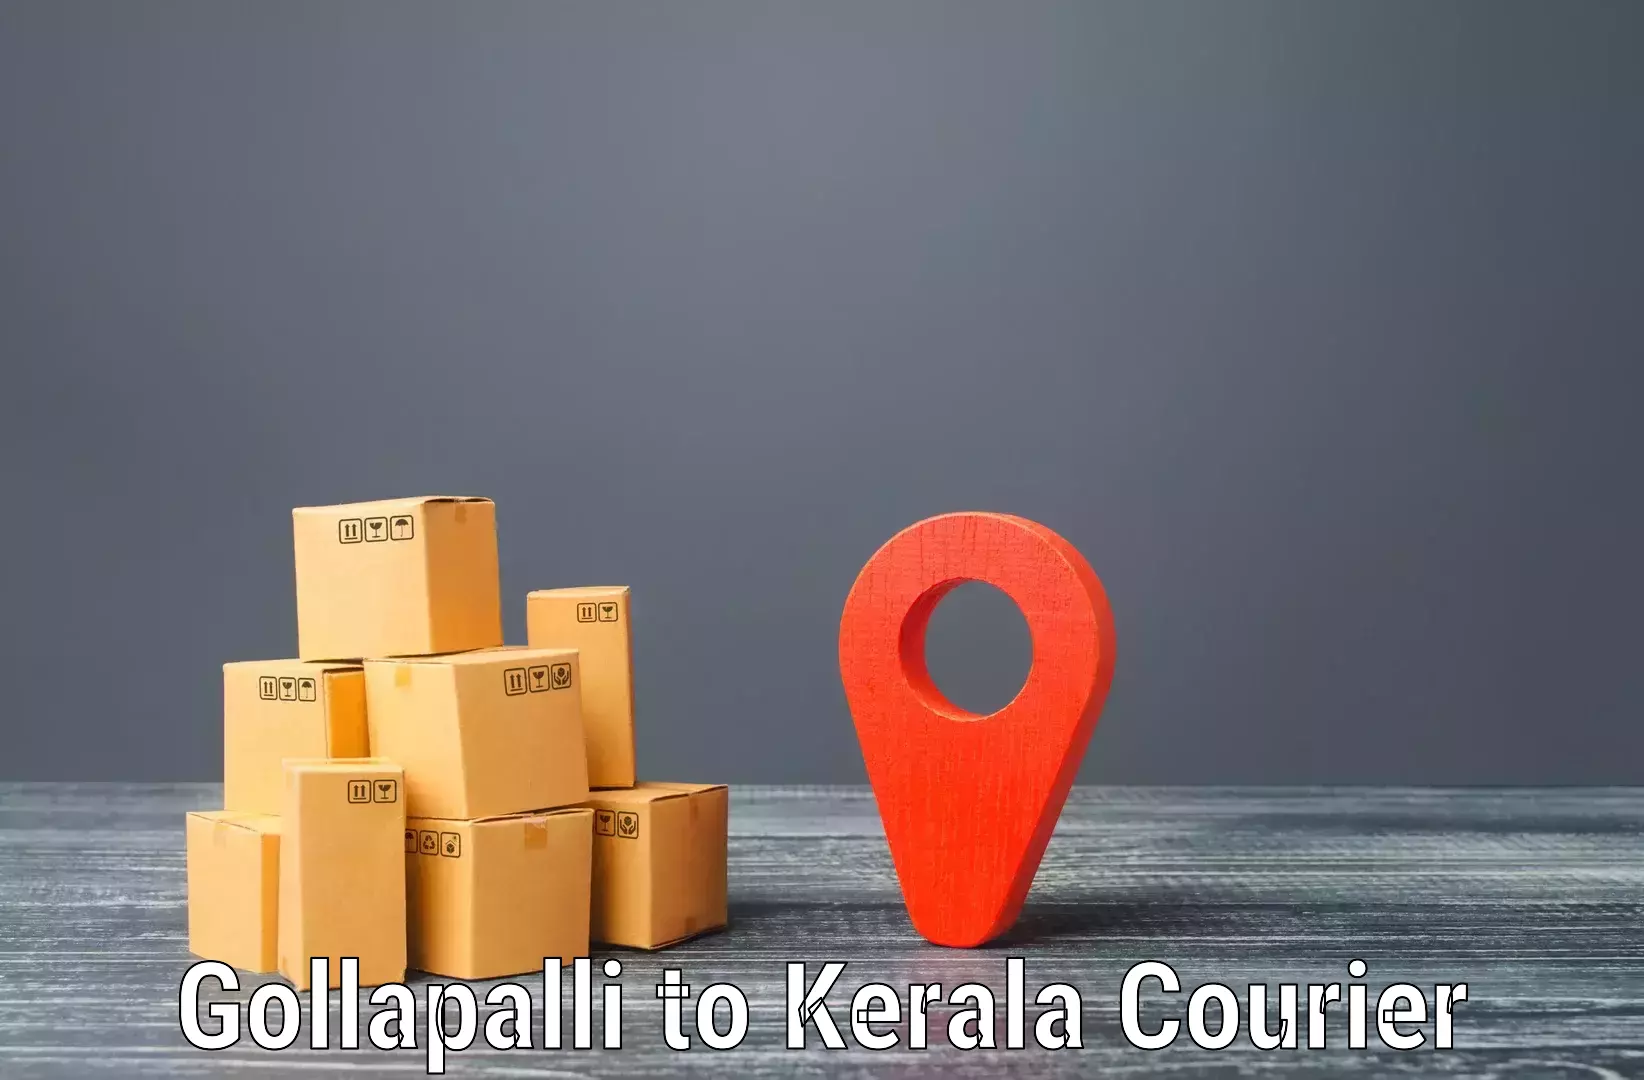 Overnight delivery services Gollapalli to Pazhayannur